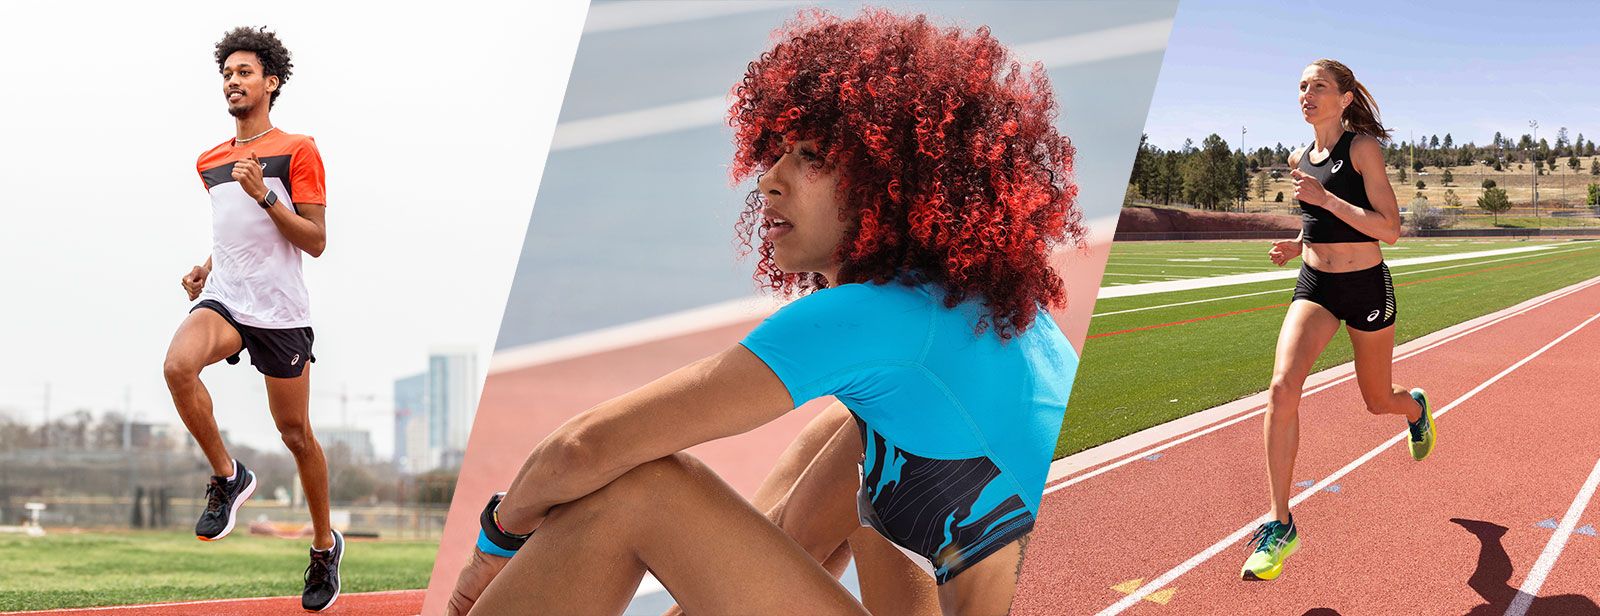 Inside ASICS | Running/Track and Field Athletes